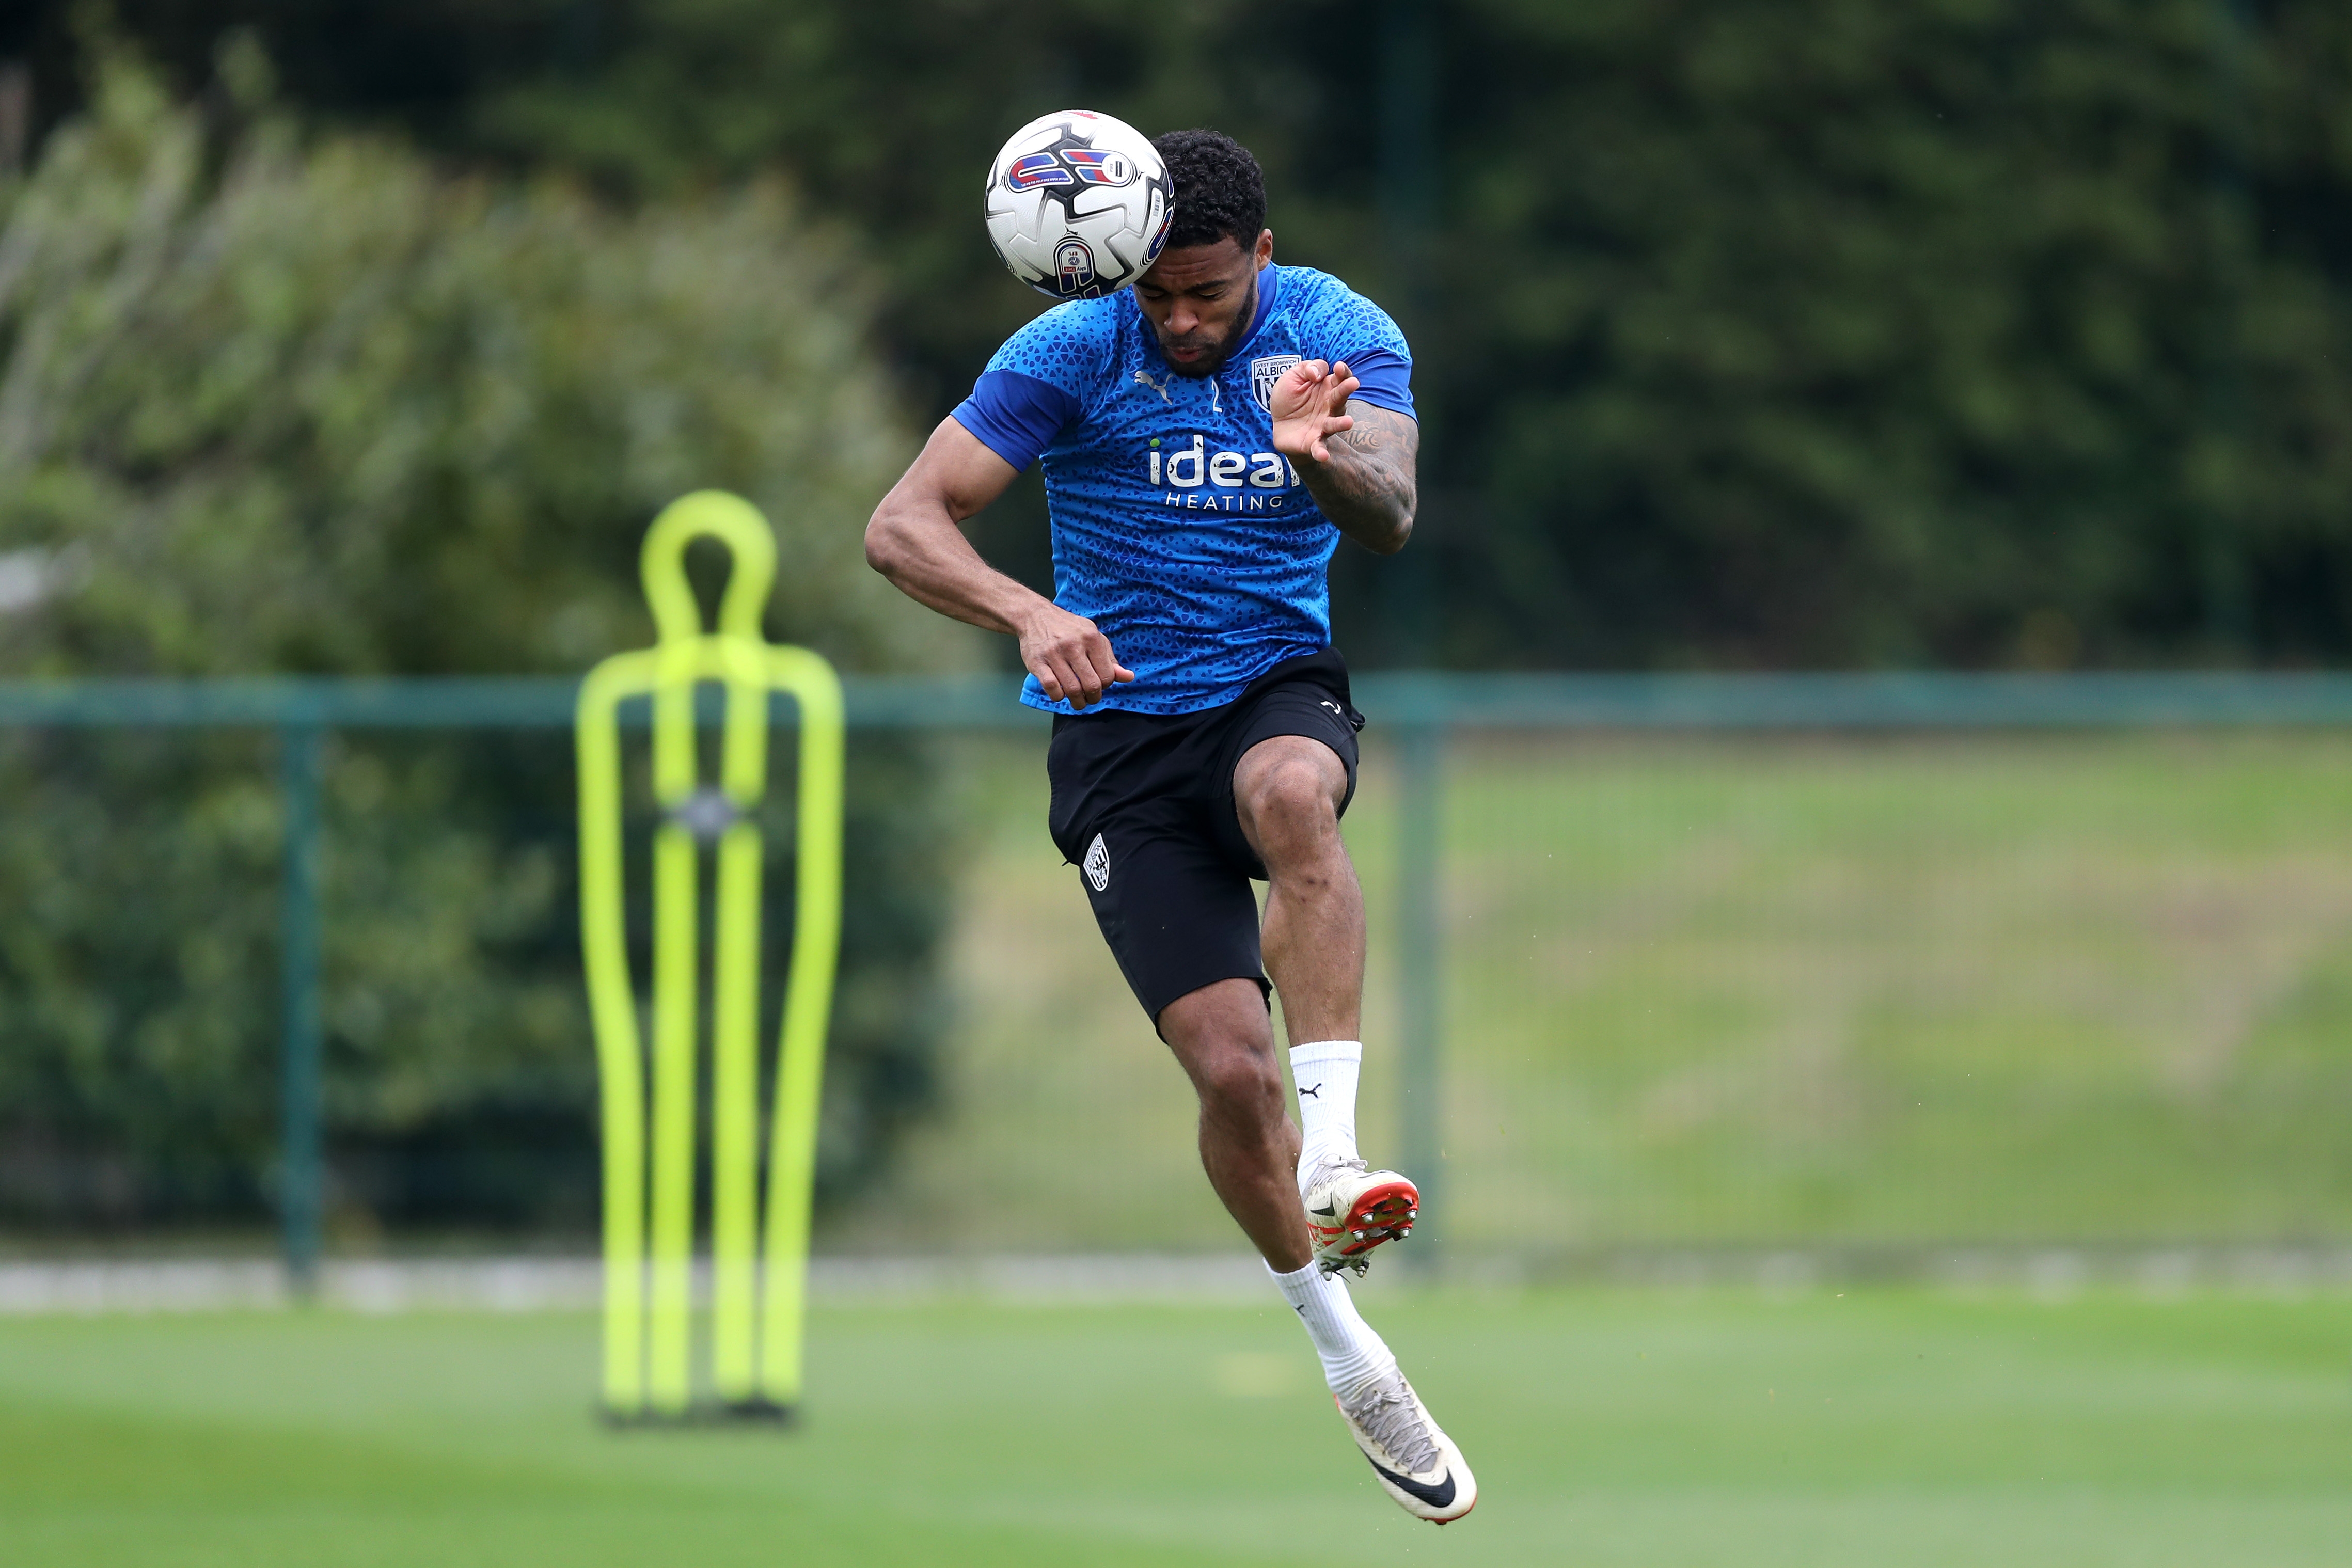 Darnell Furlong heading the ball during a training session